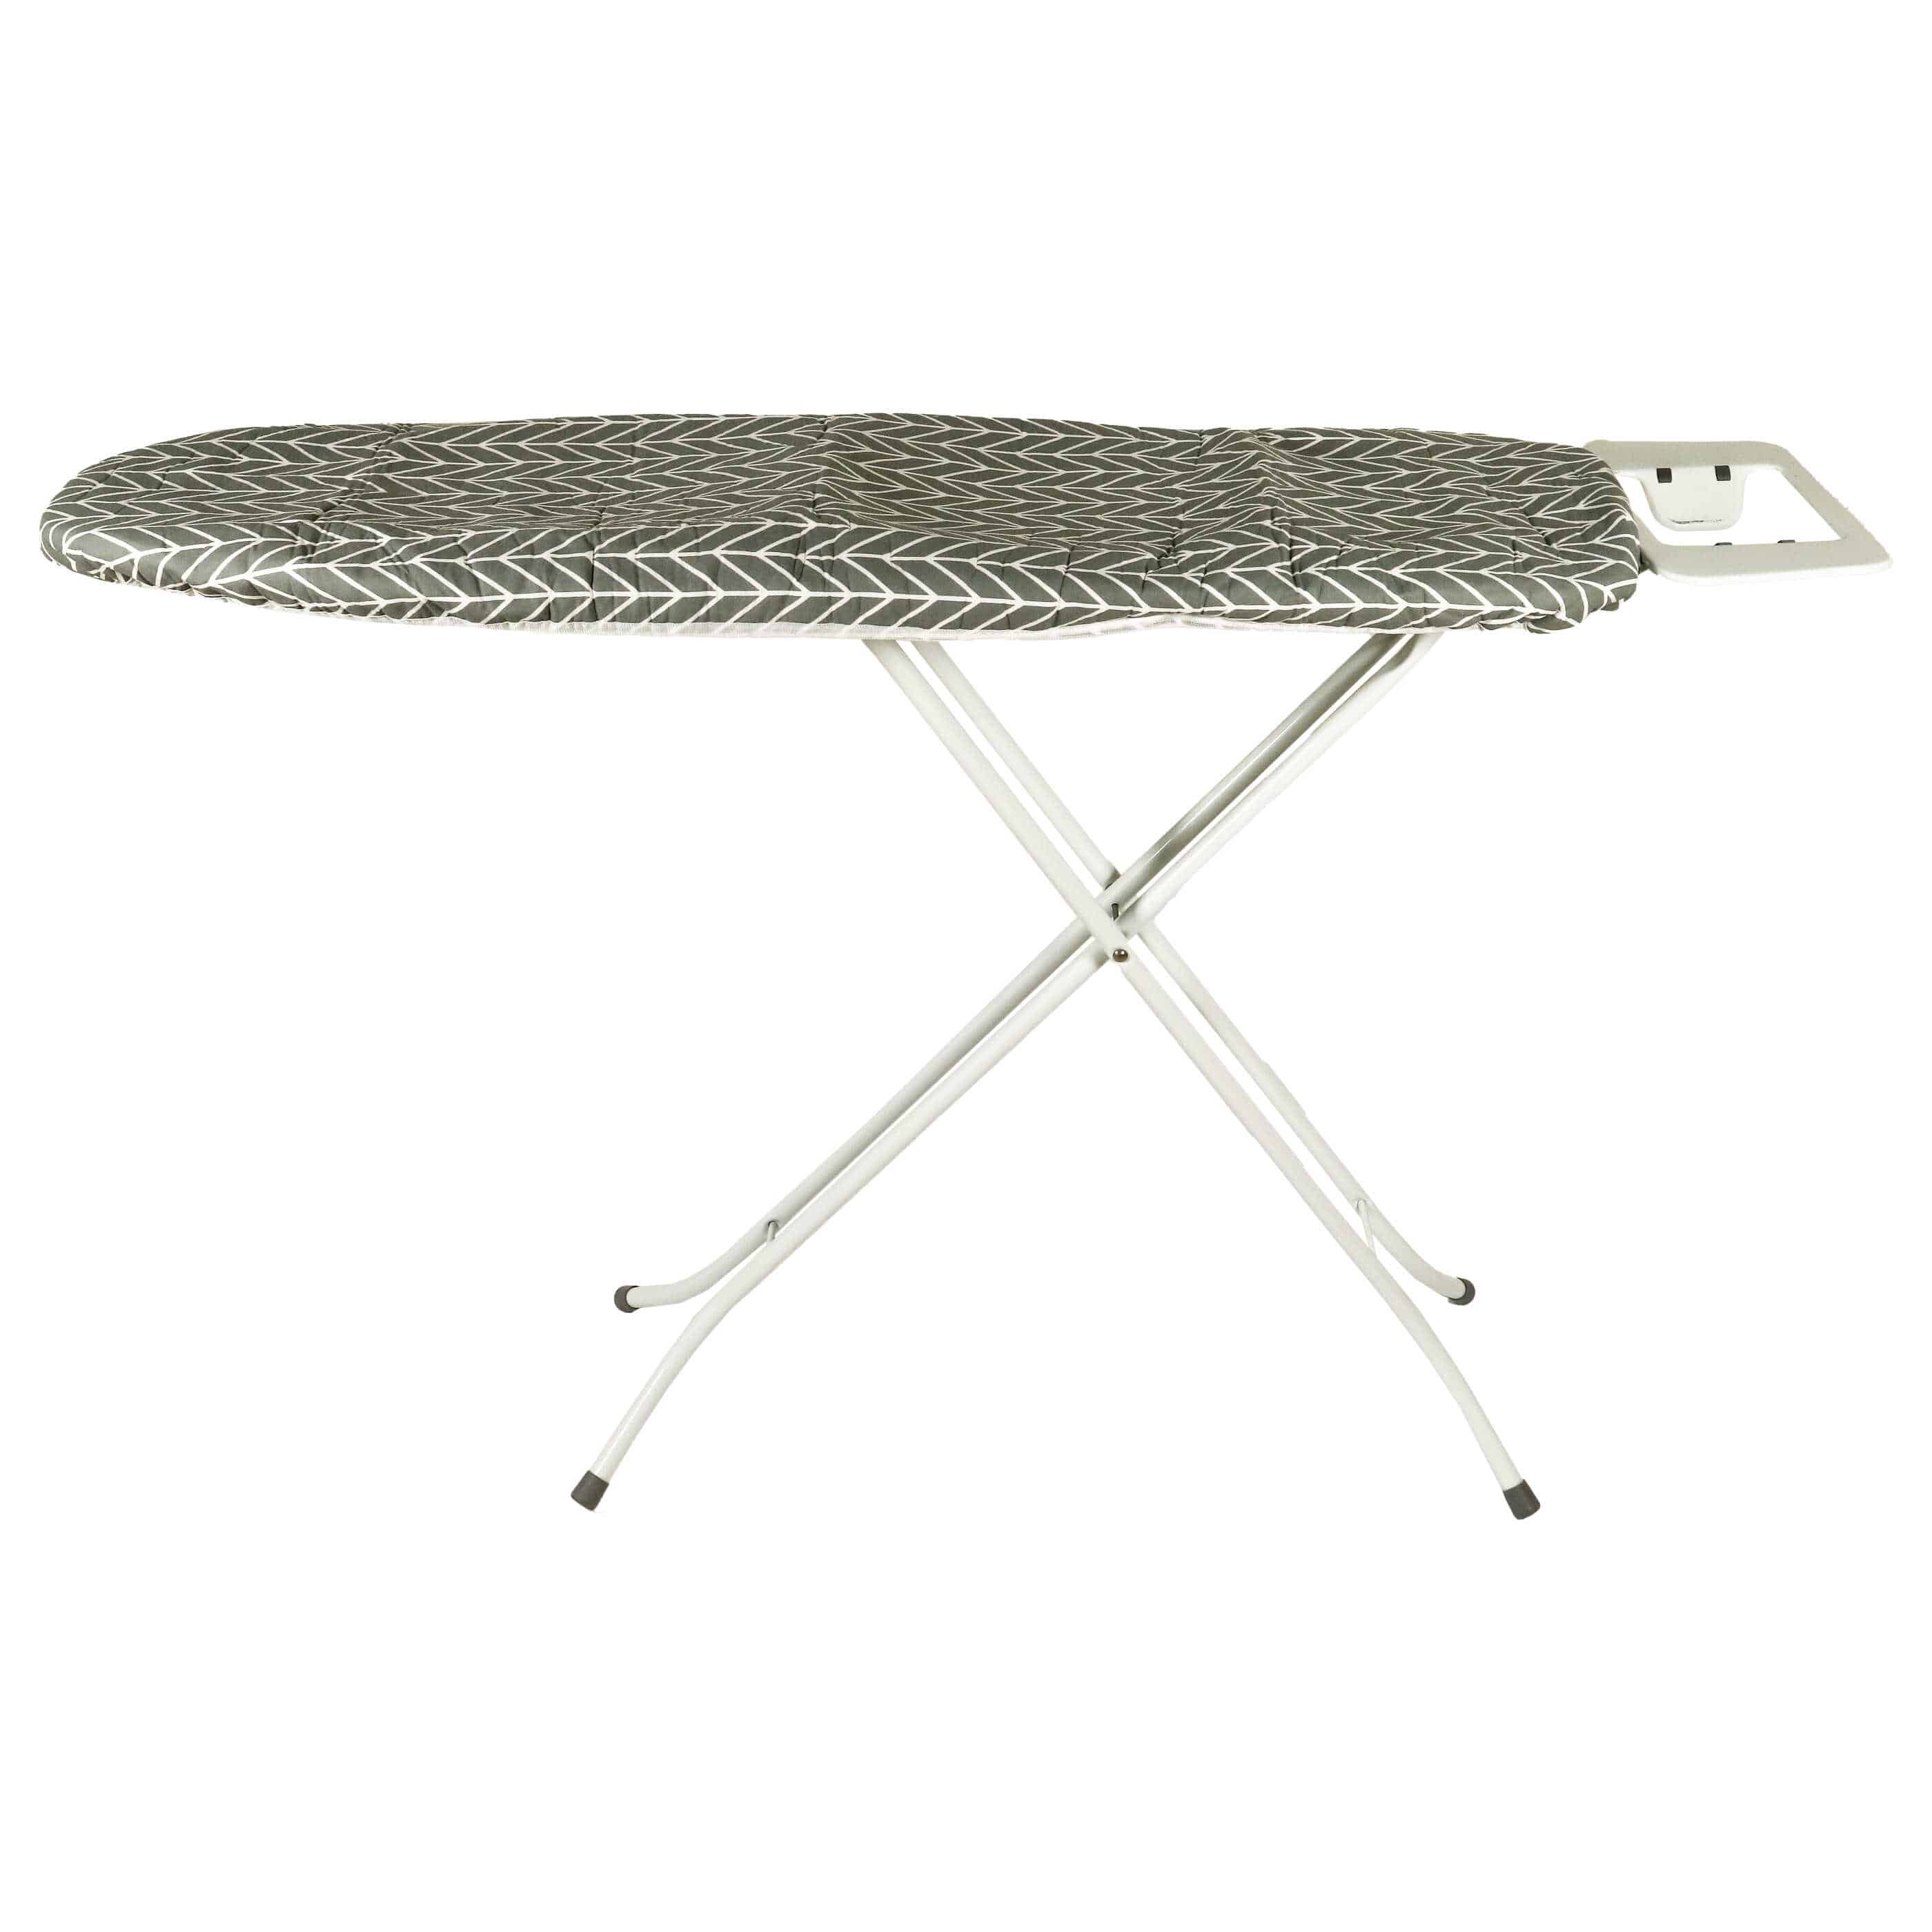 Ironing Board Cover replaces Leifheit Thermo Reflect M for Leifheit Ironing Board - Ironing Board Cover